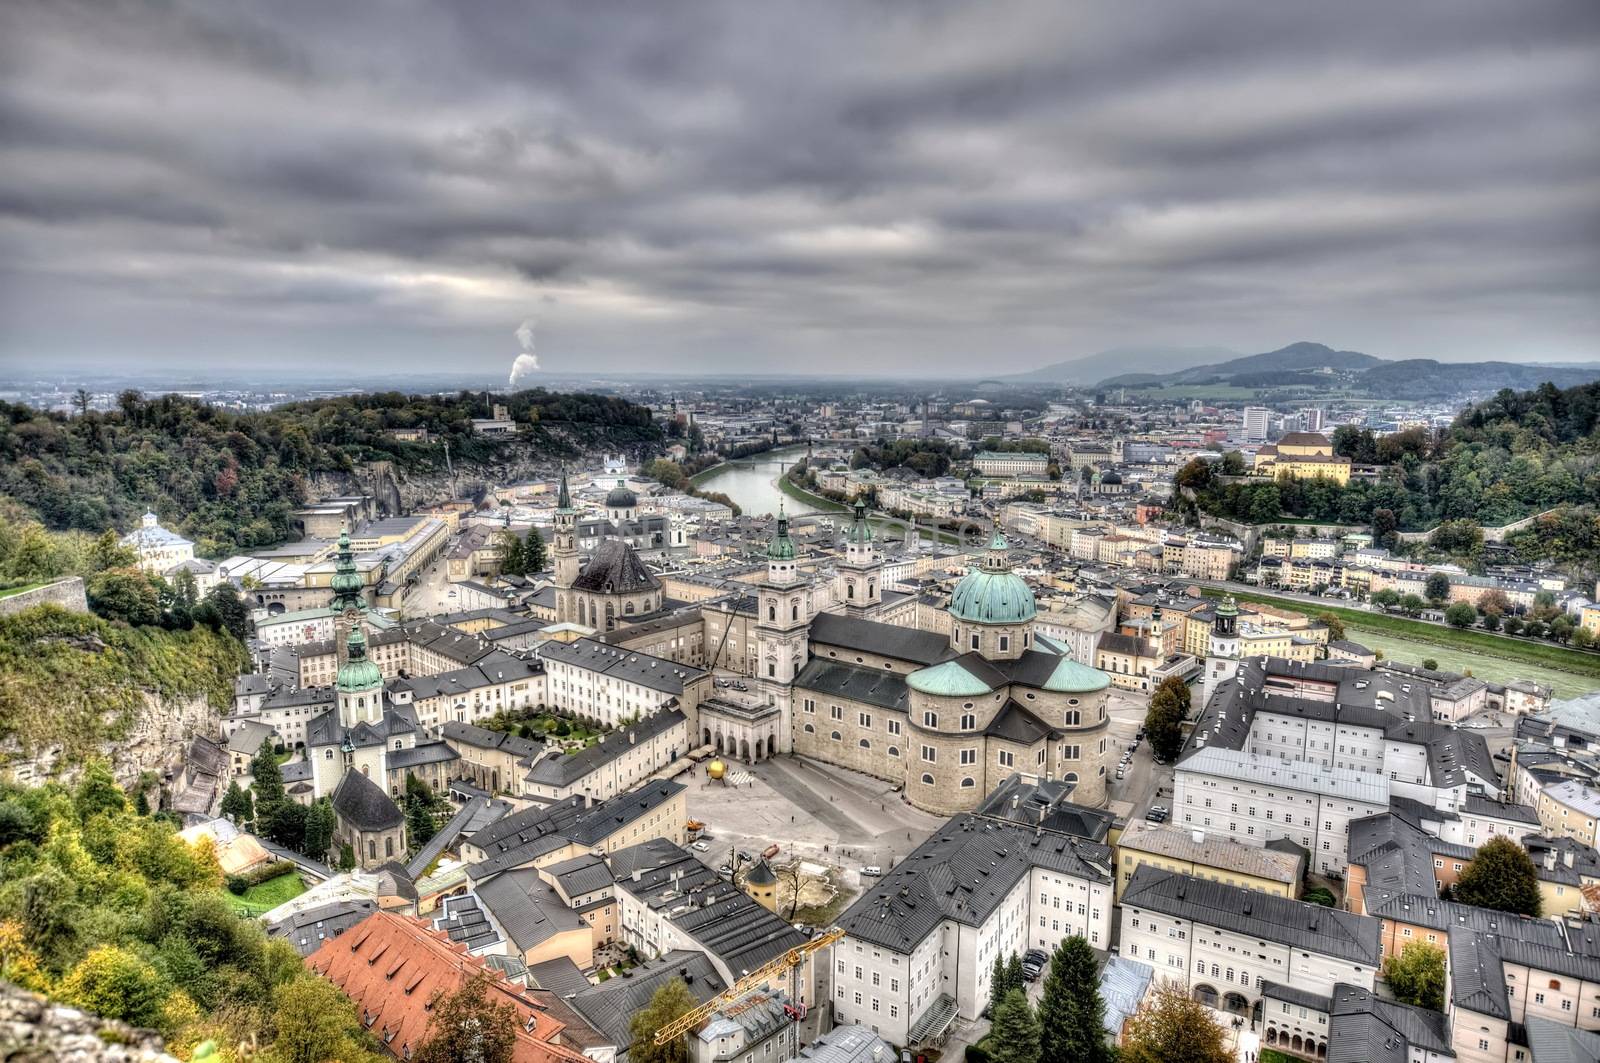 City of Salzburg from the fortress by anderm